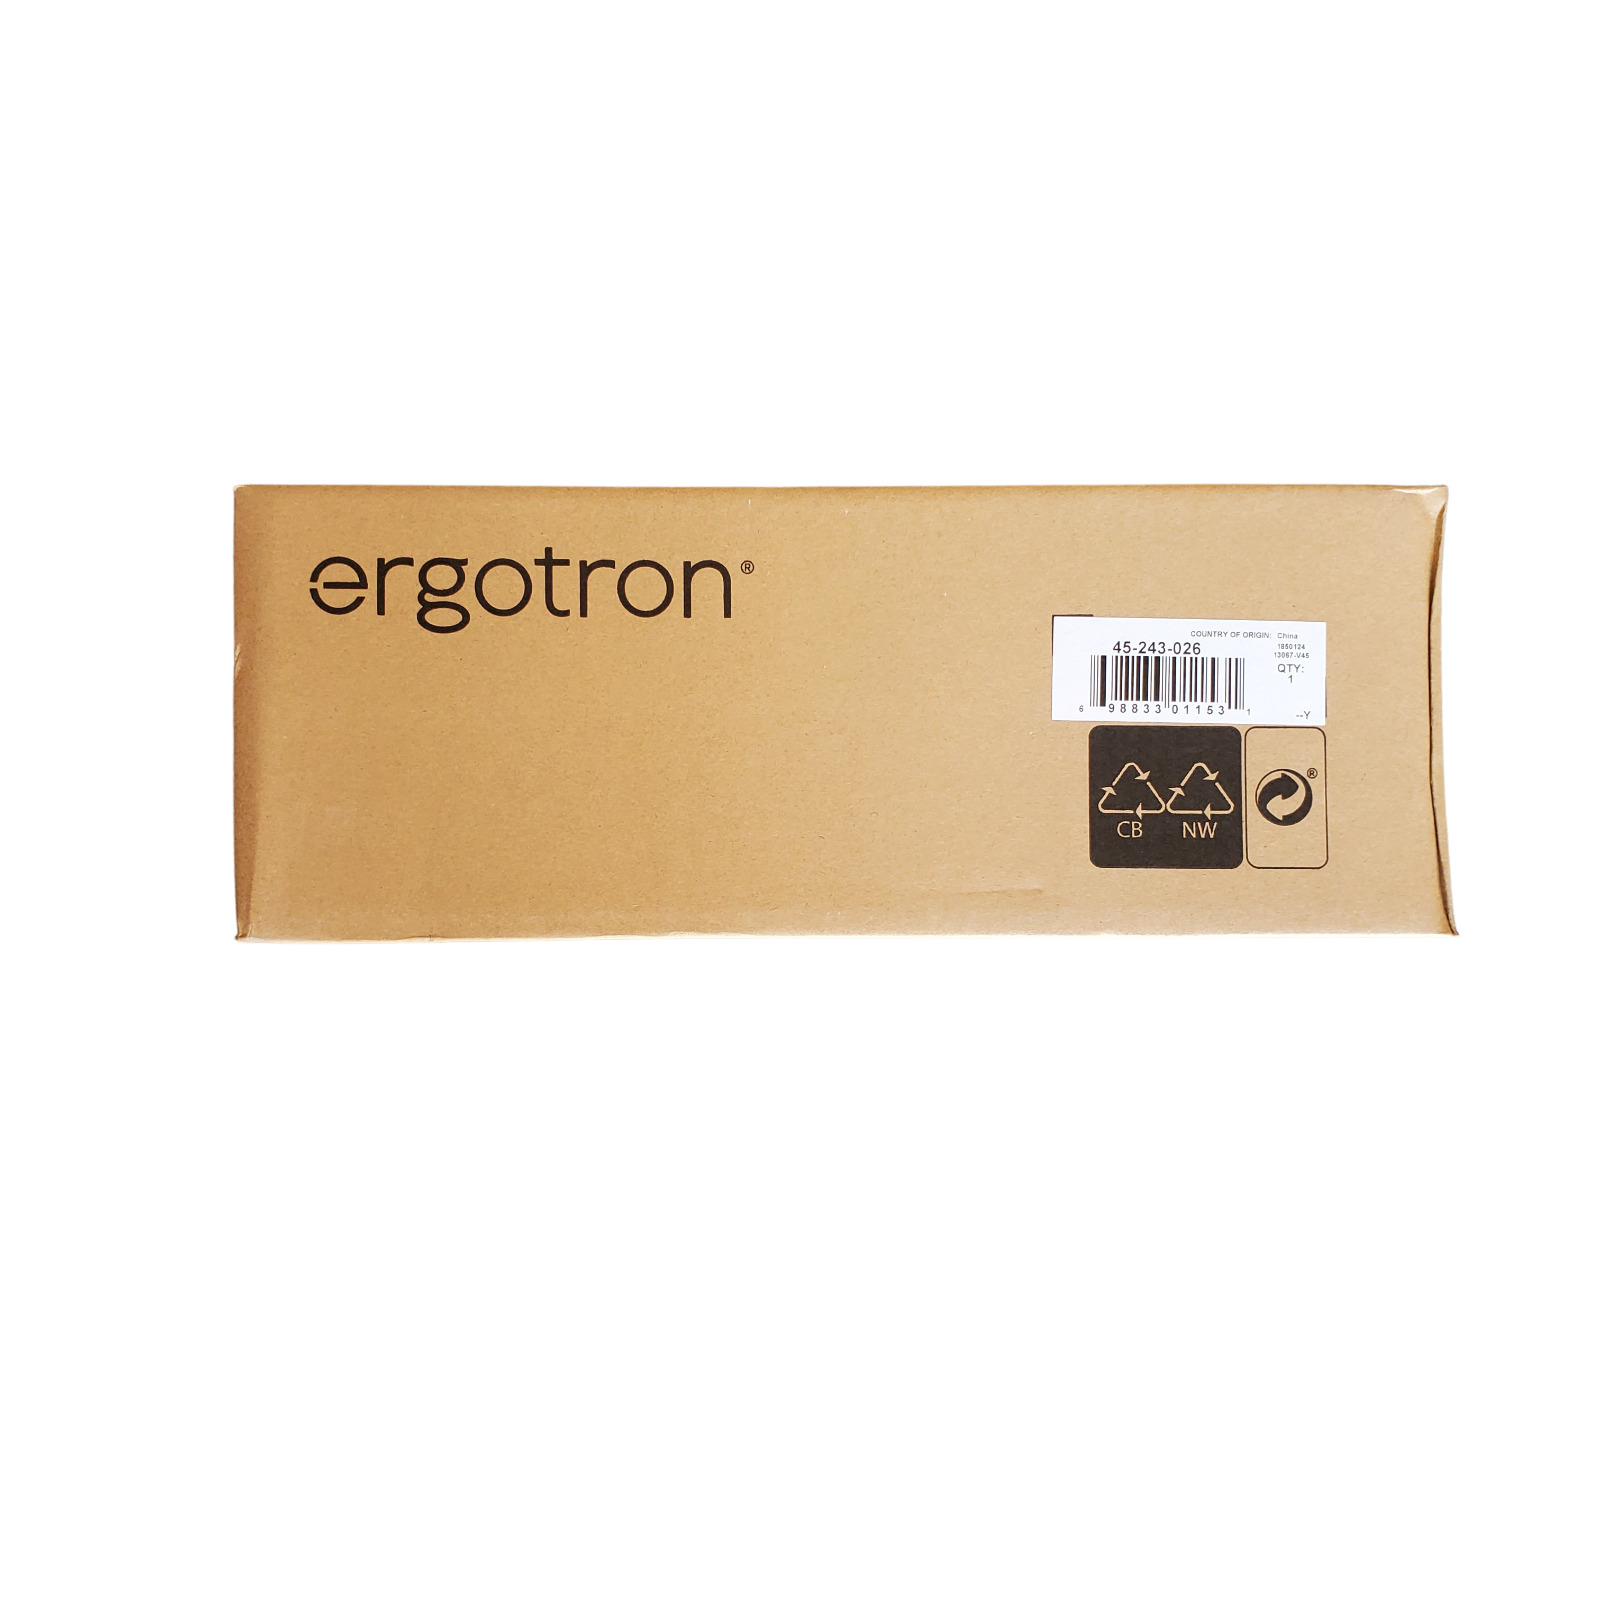 NEW in BOX Ergotron 45-243-026 LX Wall Mount LCD Monitor Arm Polished Aluminum